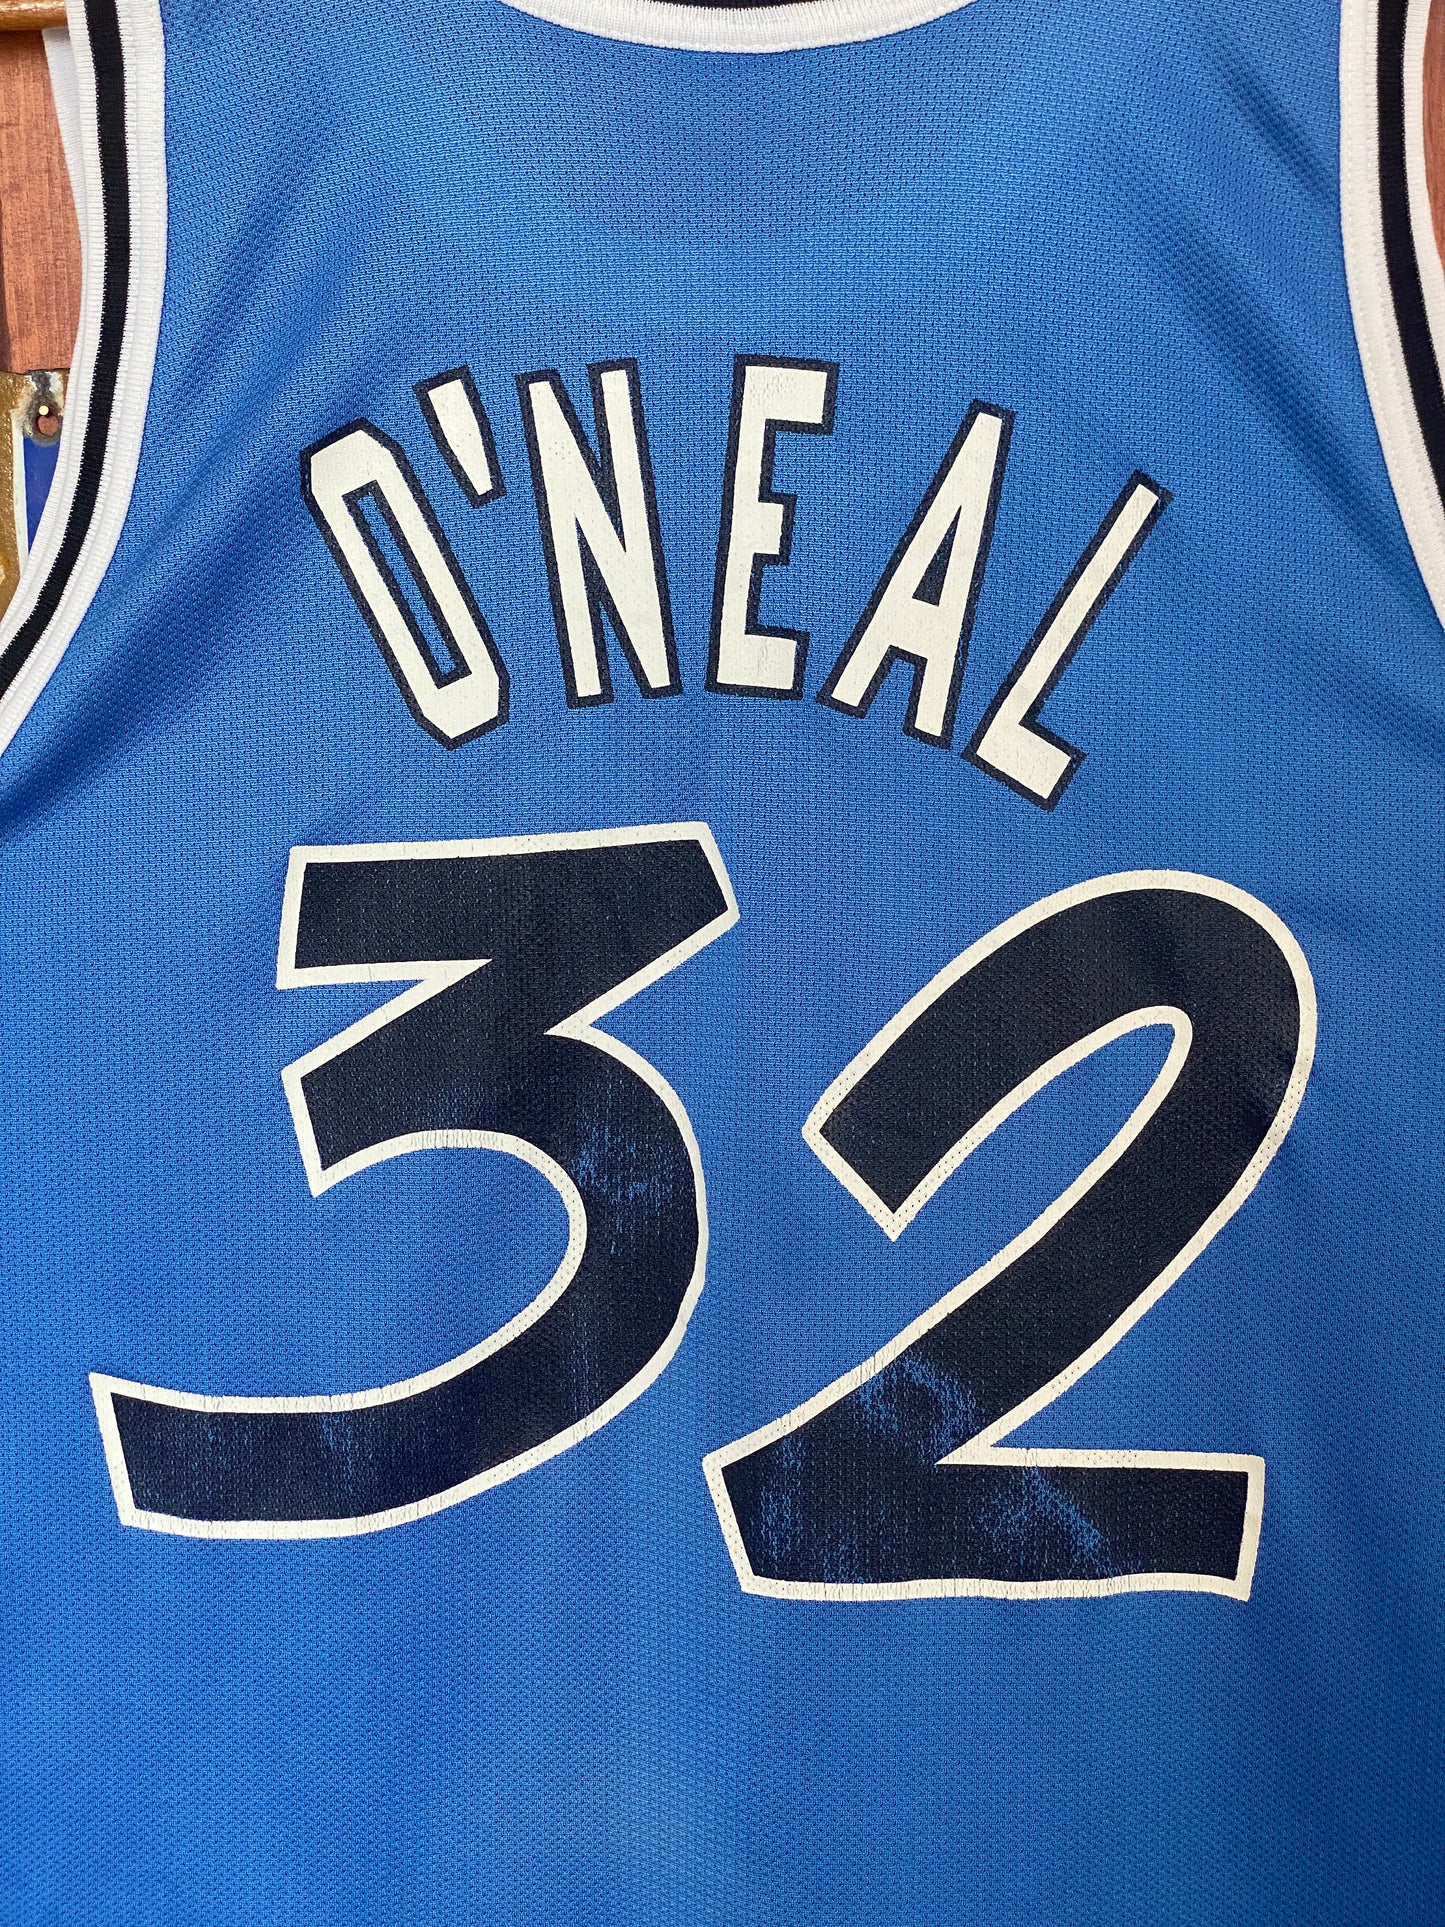  Vintage 90s Orlando NBA jersey with player O'Neal #32, size 48 - front view. Made by Champion.